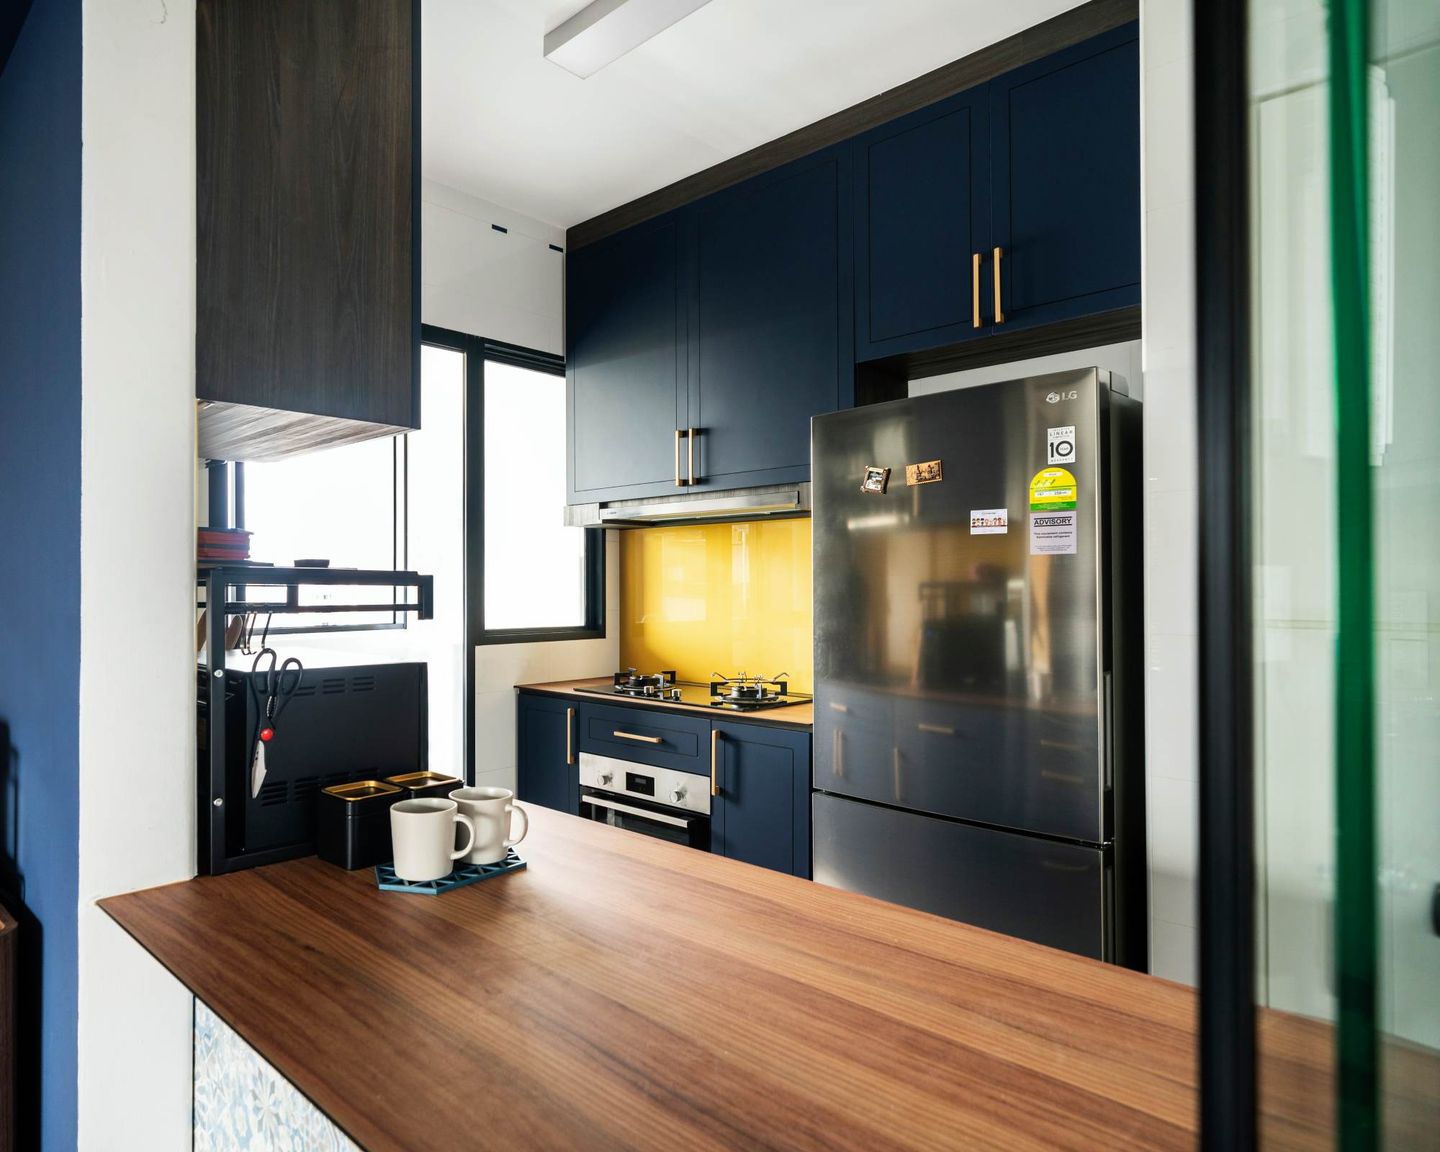 Contemporary Home Design With Contrasting Shades of Blue And Yellow